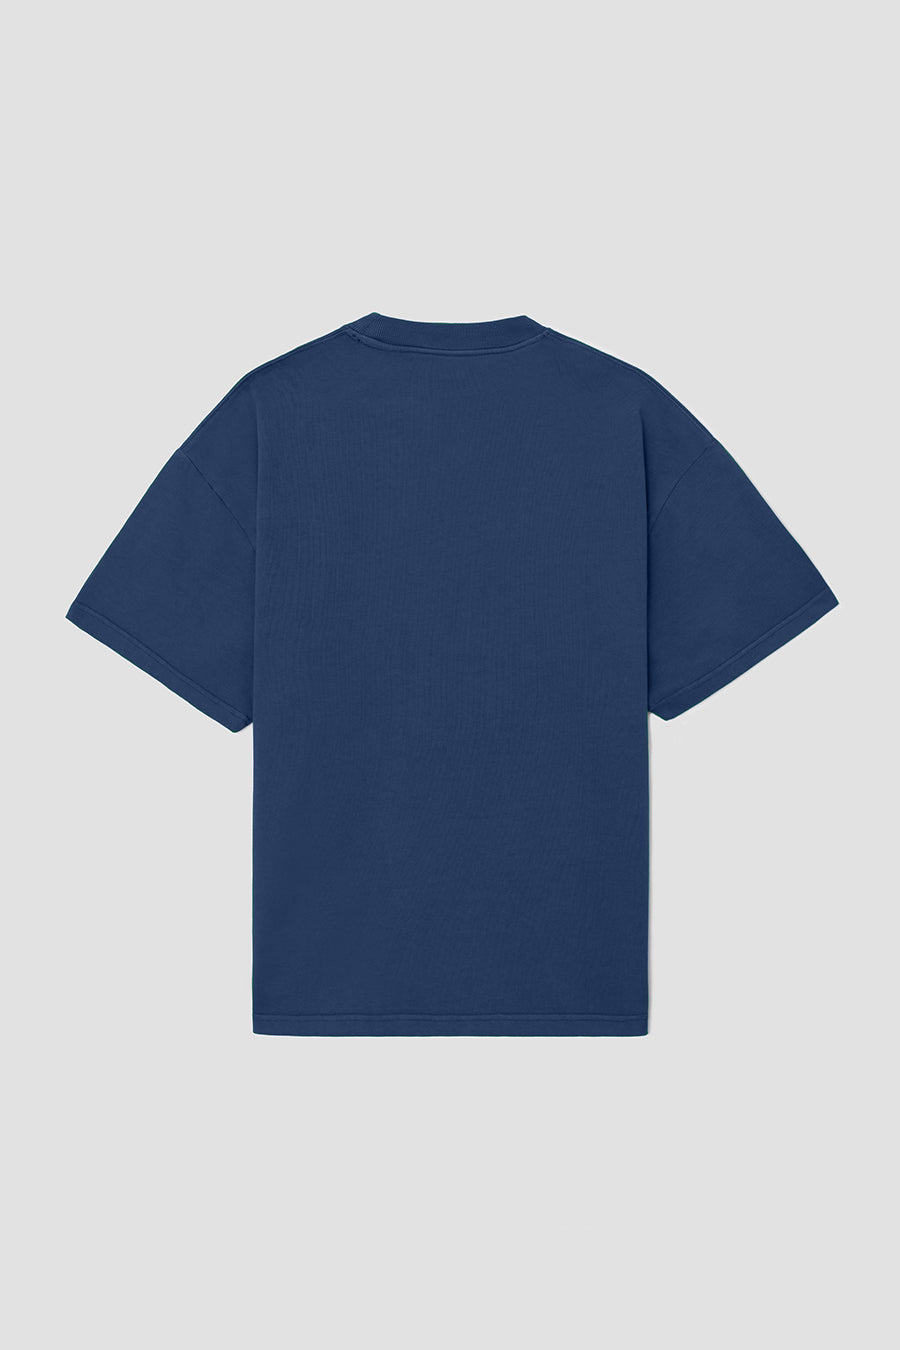 Navy T-Shirt - only available in wholesale